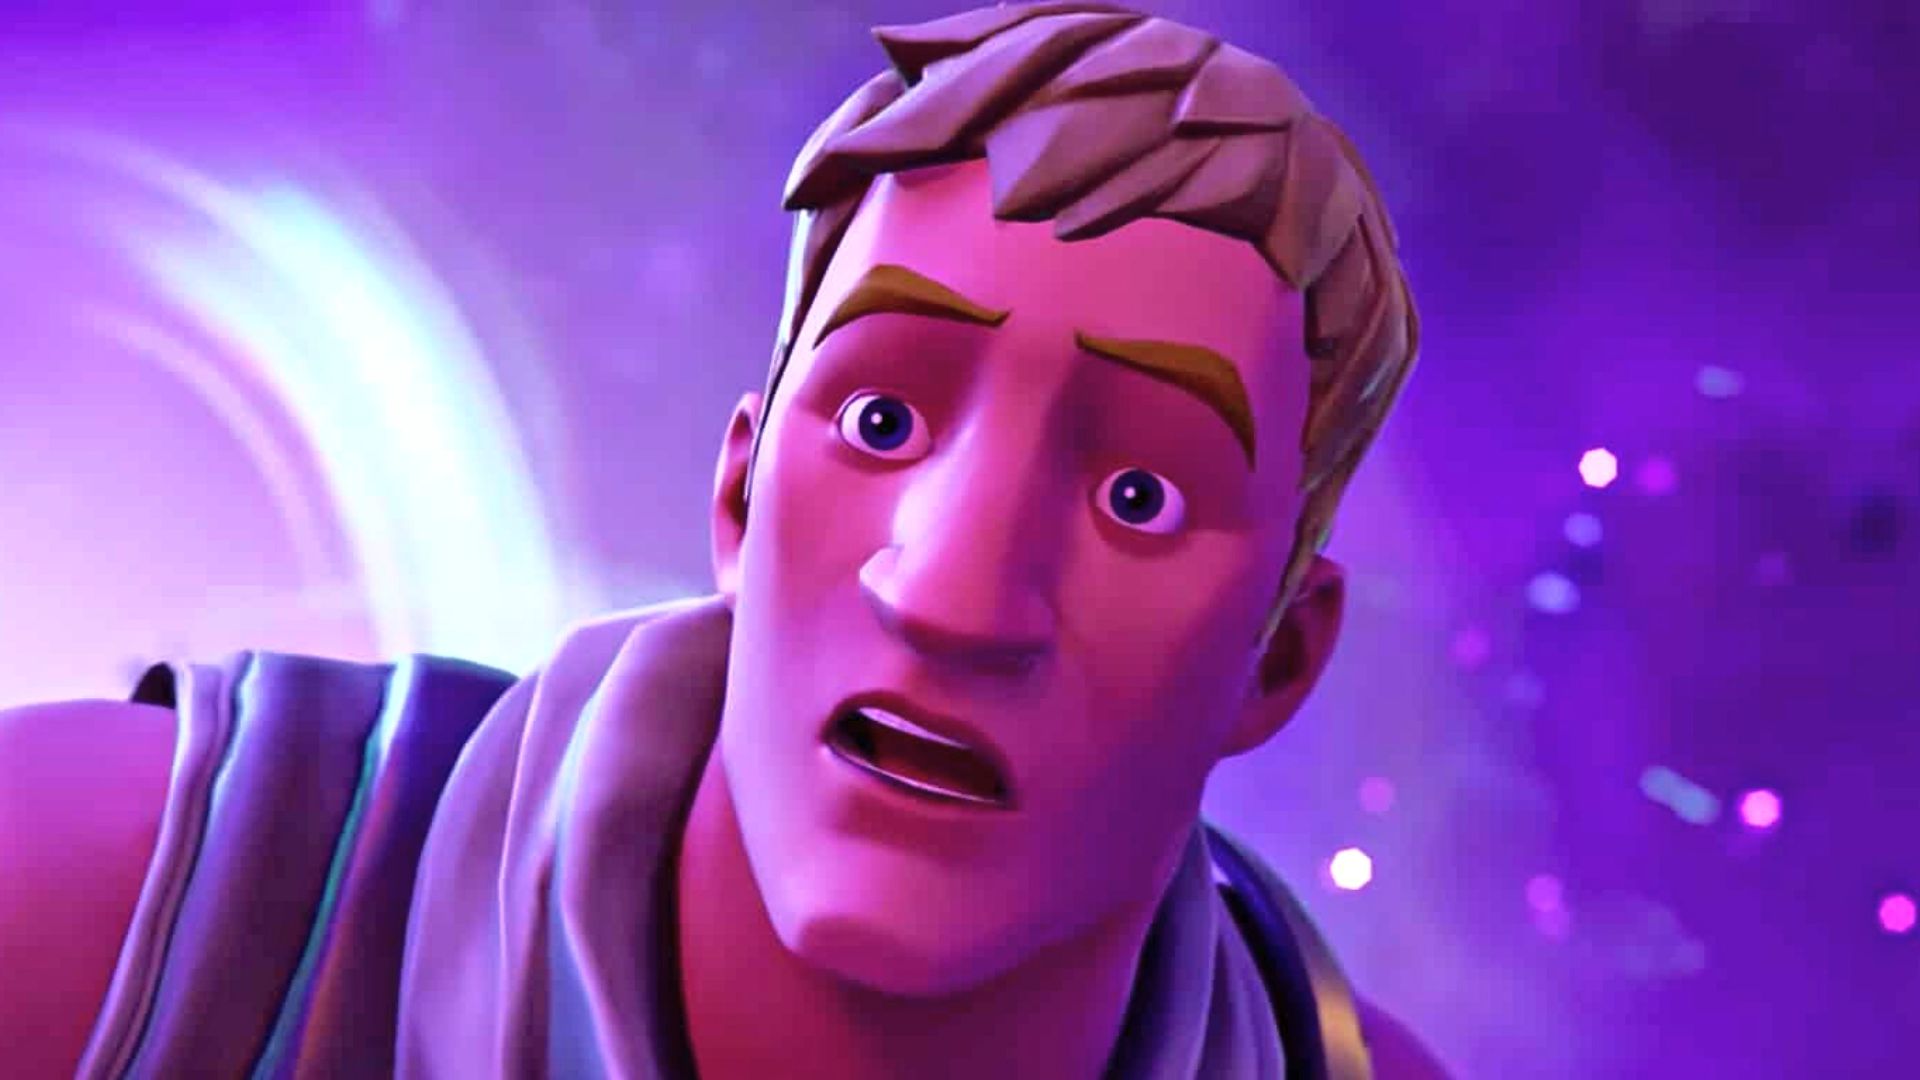 Fortnite Chapter 3 map to have surprise ending with “Fracture” event